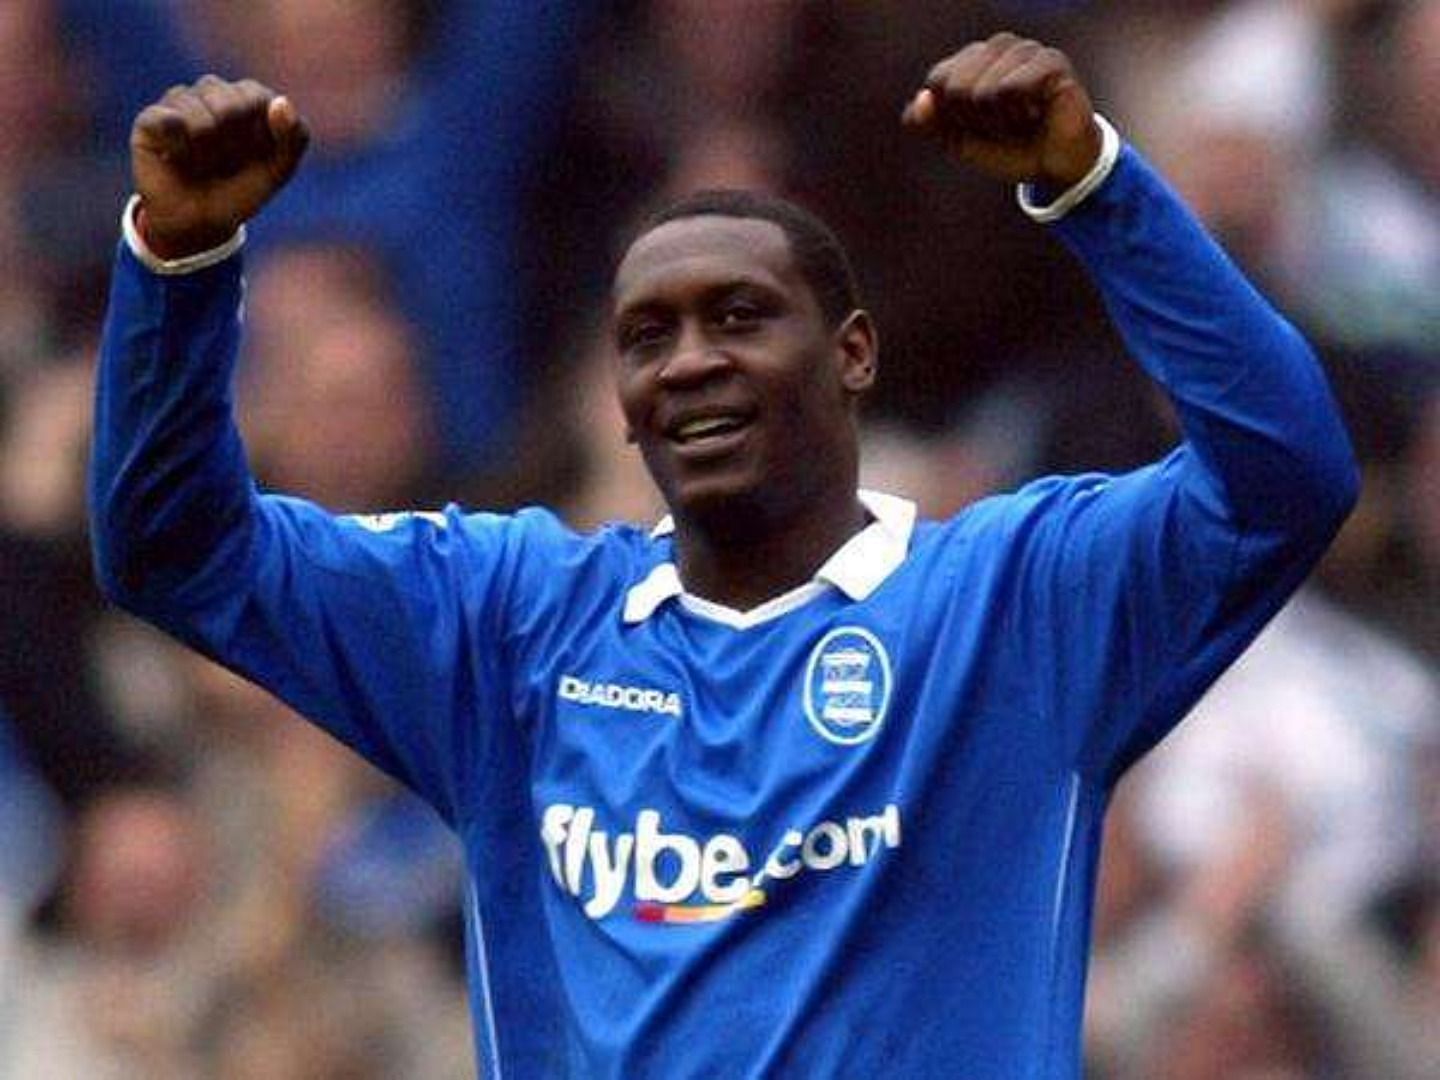 In his two years with Birmingham City, he just had one good season and attracted much criticism from fans.